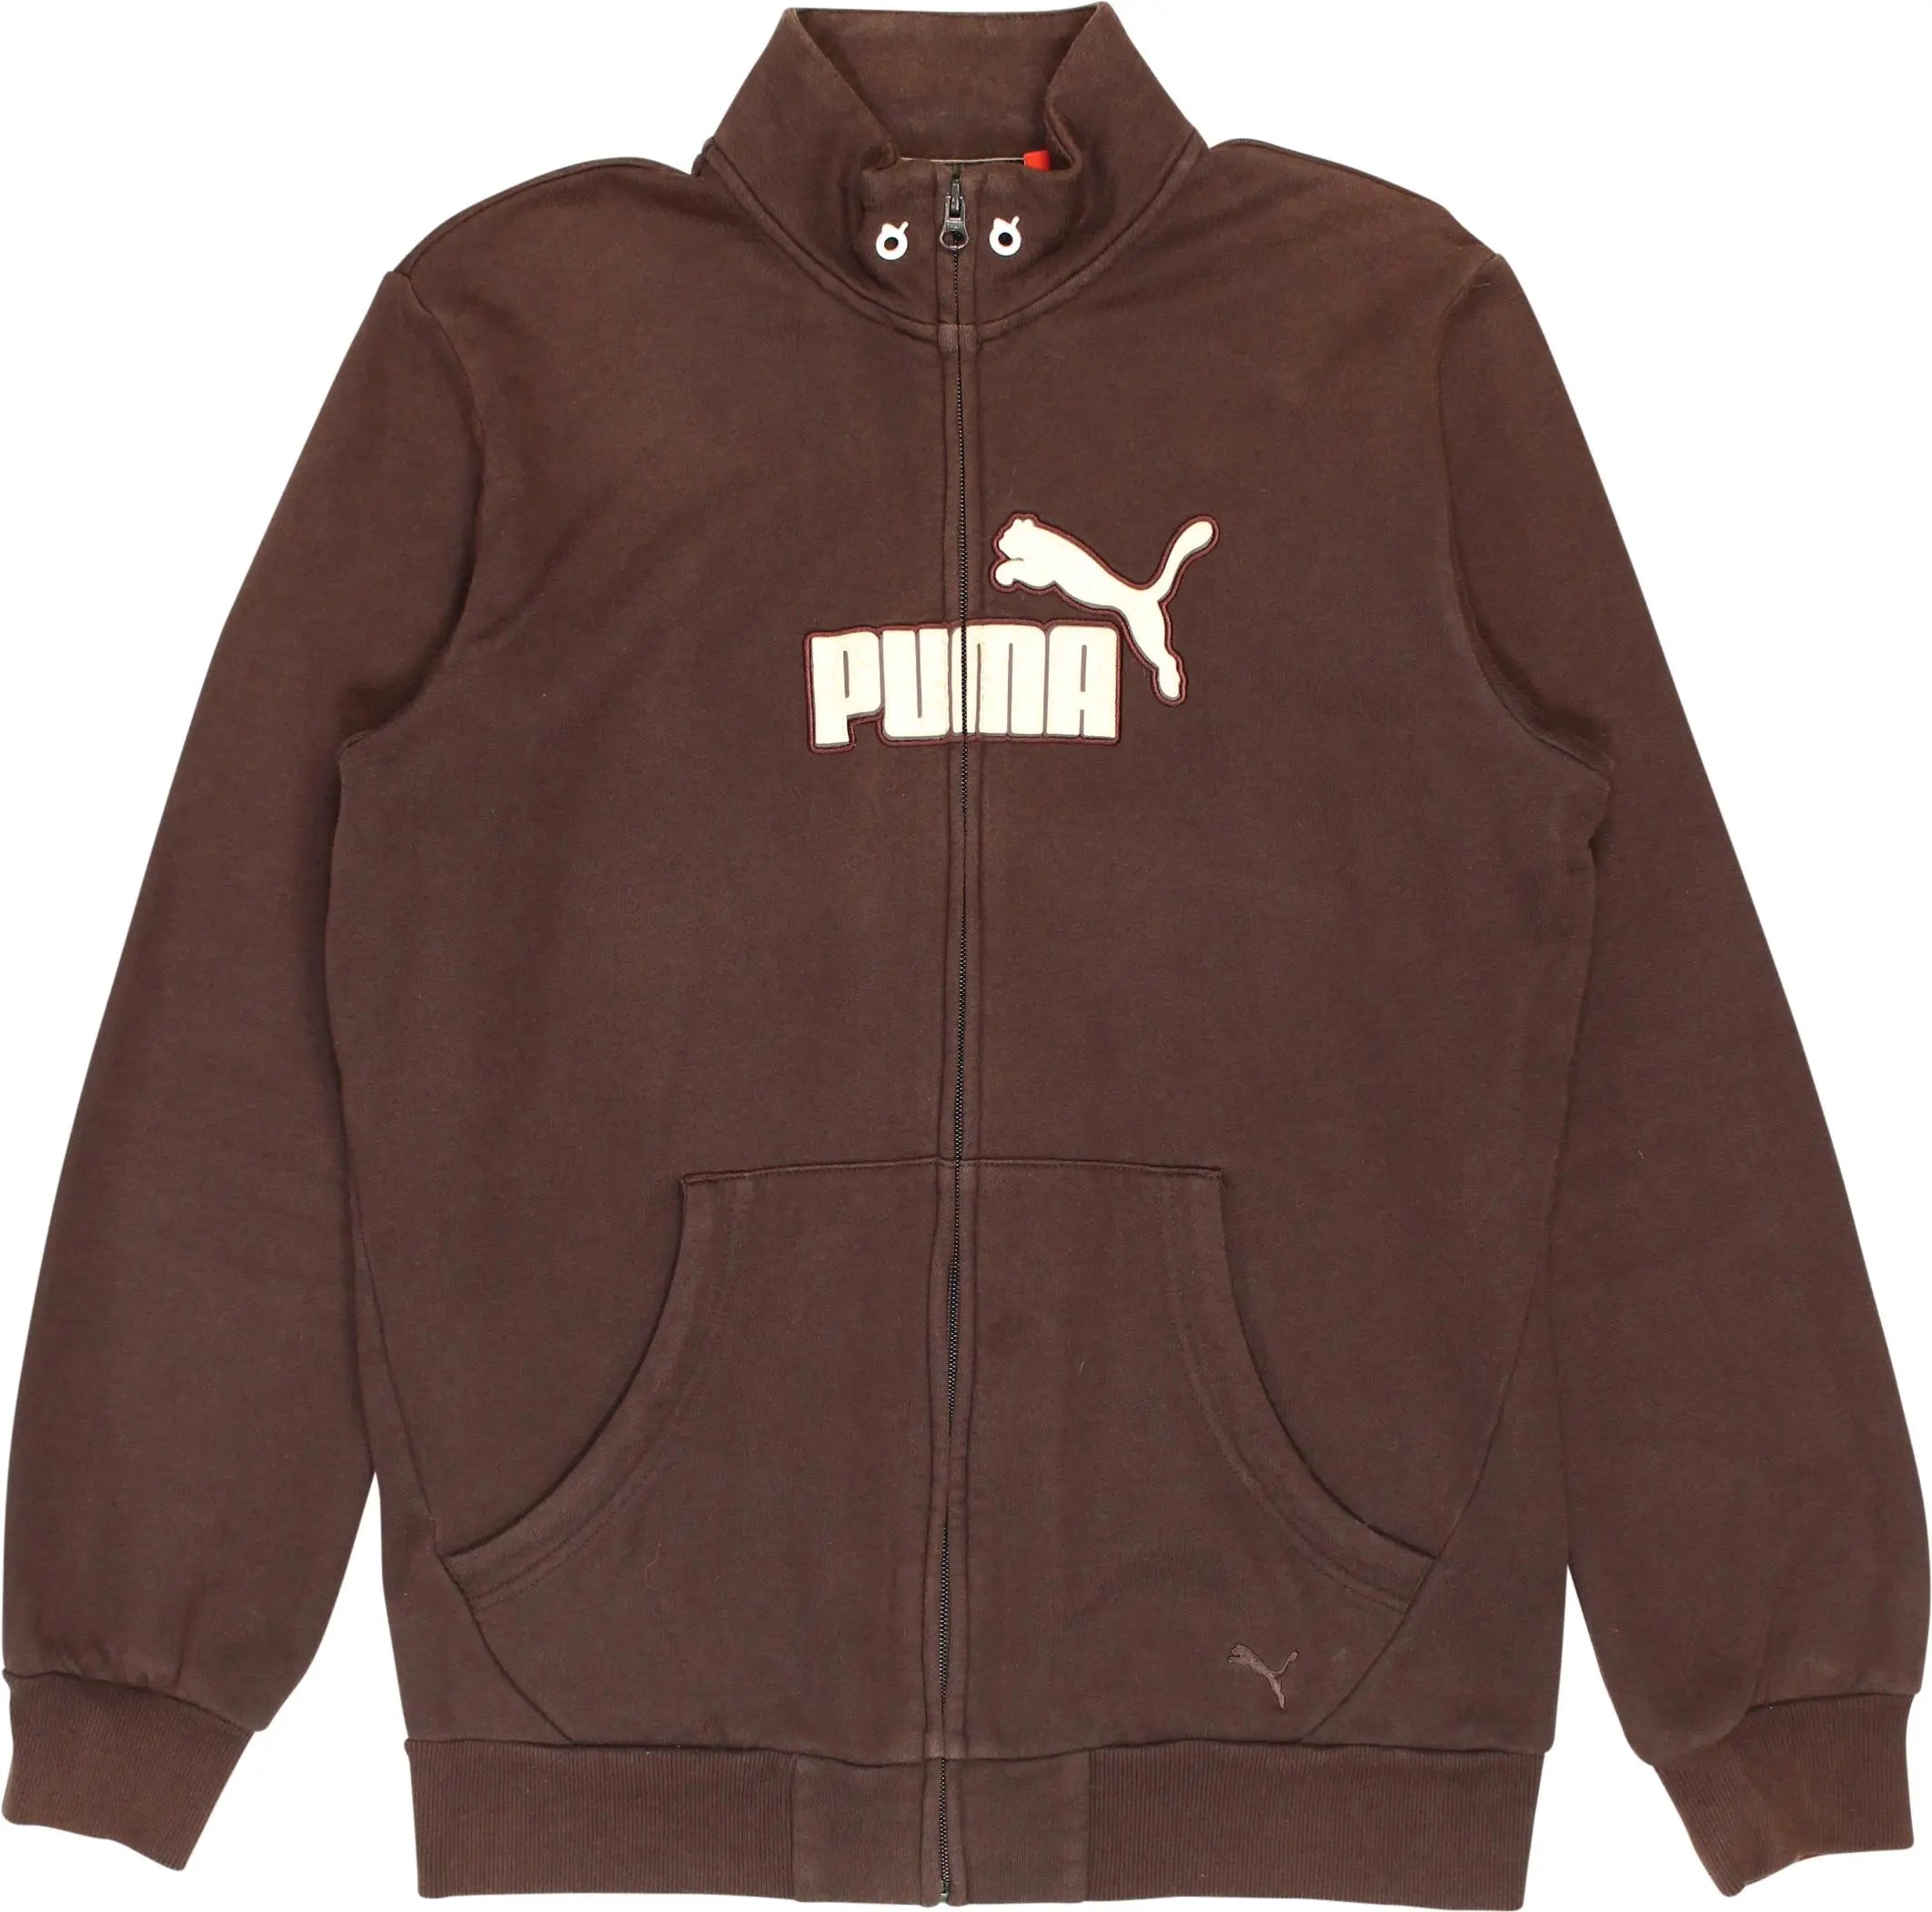 Puma - Brown Zip-up Sweater by Puma- ThriftTale.com - Vintage and second handclothing